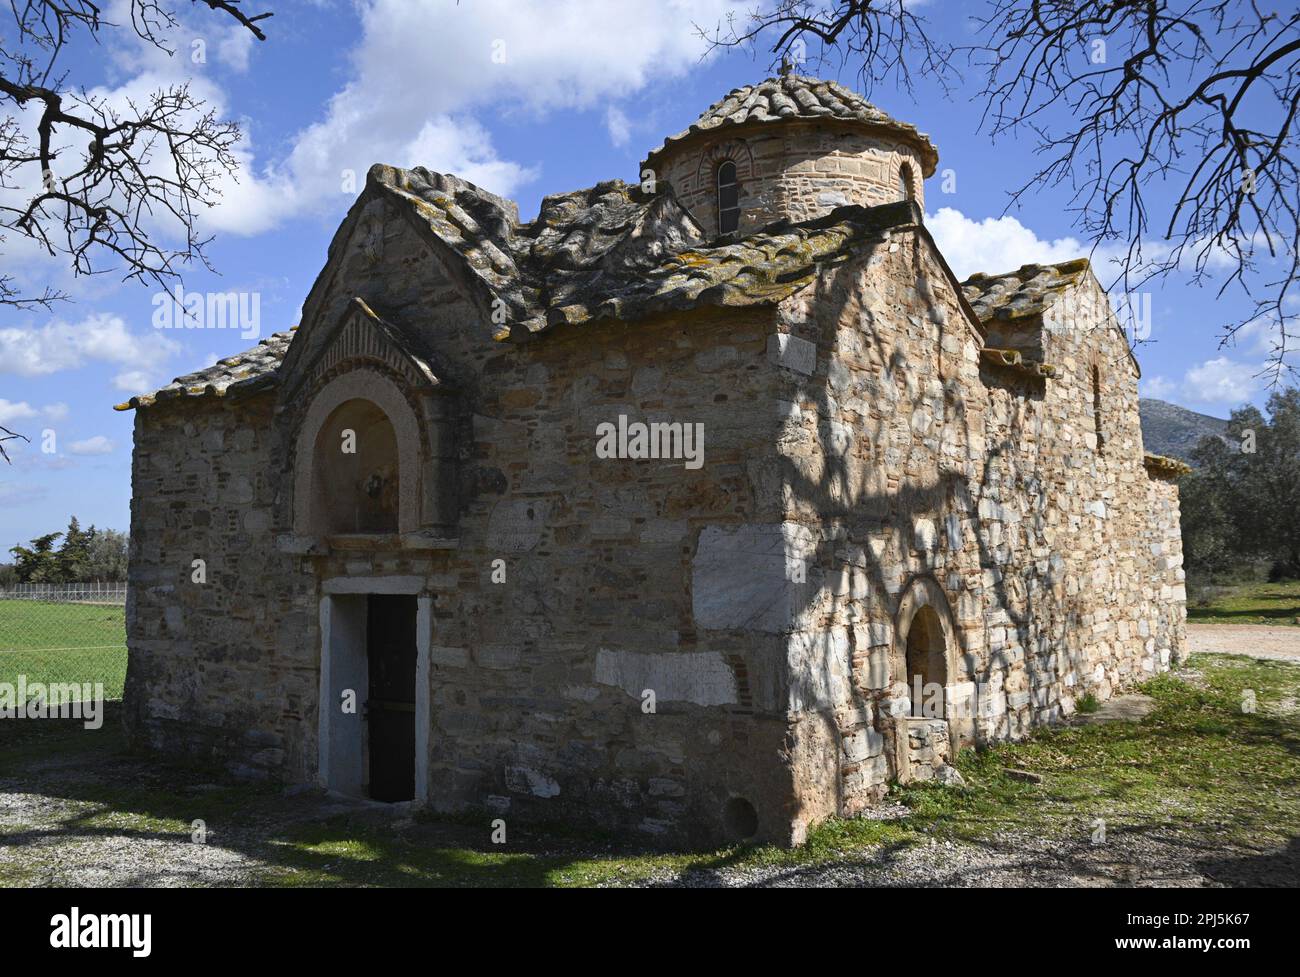 Landscape with scenic exterior view of Aghios Petros a 12th century rectangular cruciform Byzantine church in Kalyvia Thorikou, Attica Greece. Stock Photo